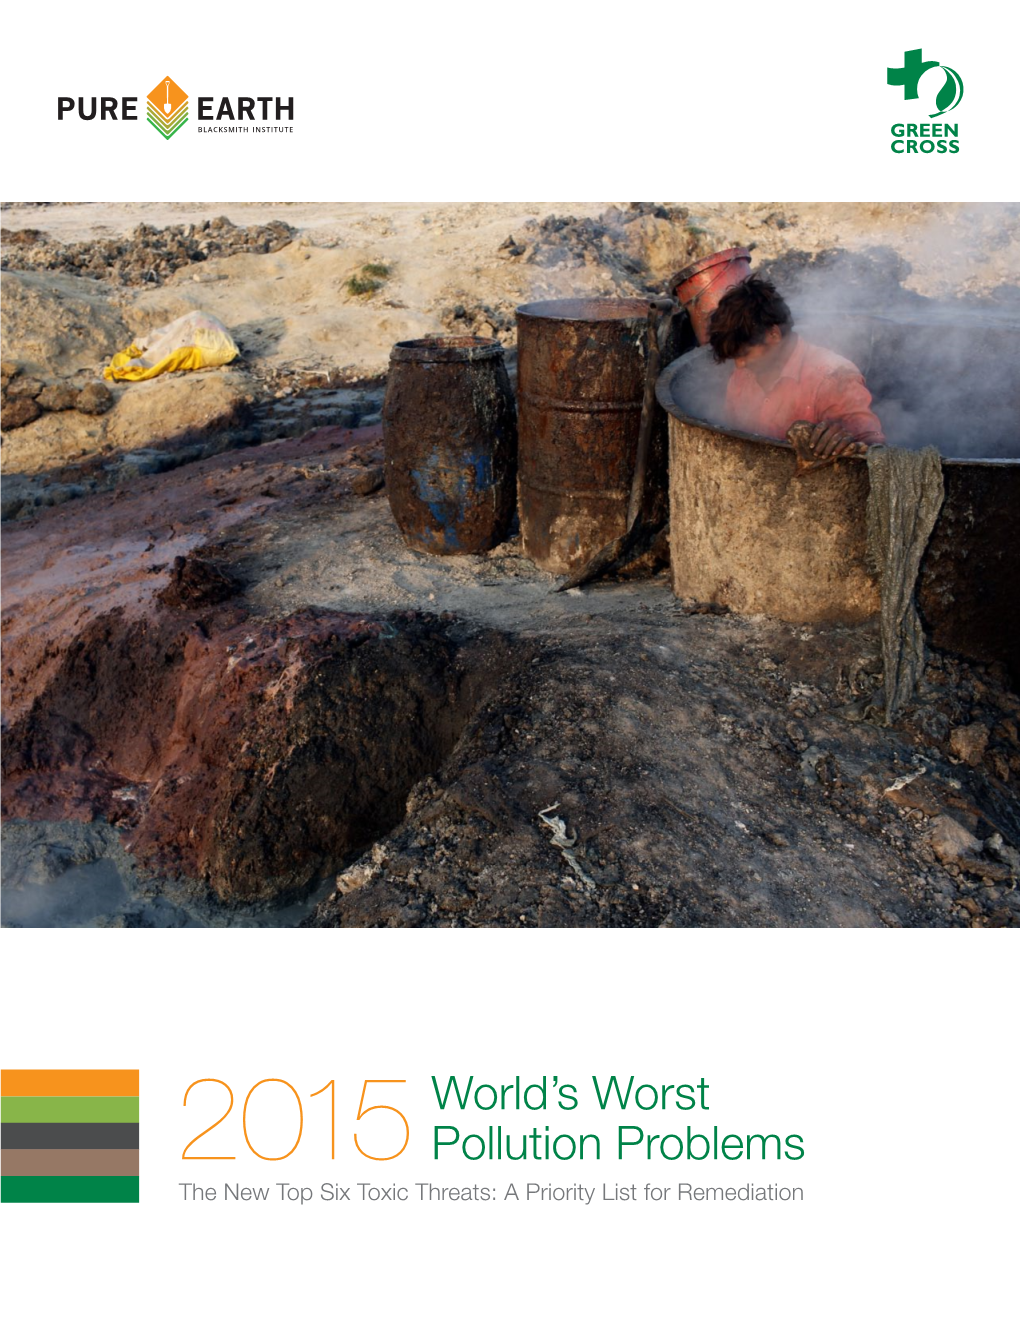 The 2015 World's Worst Pollution Problems